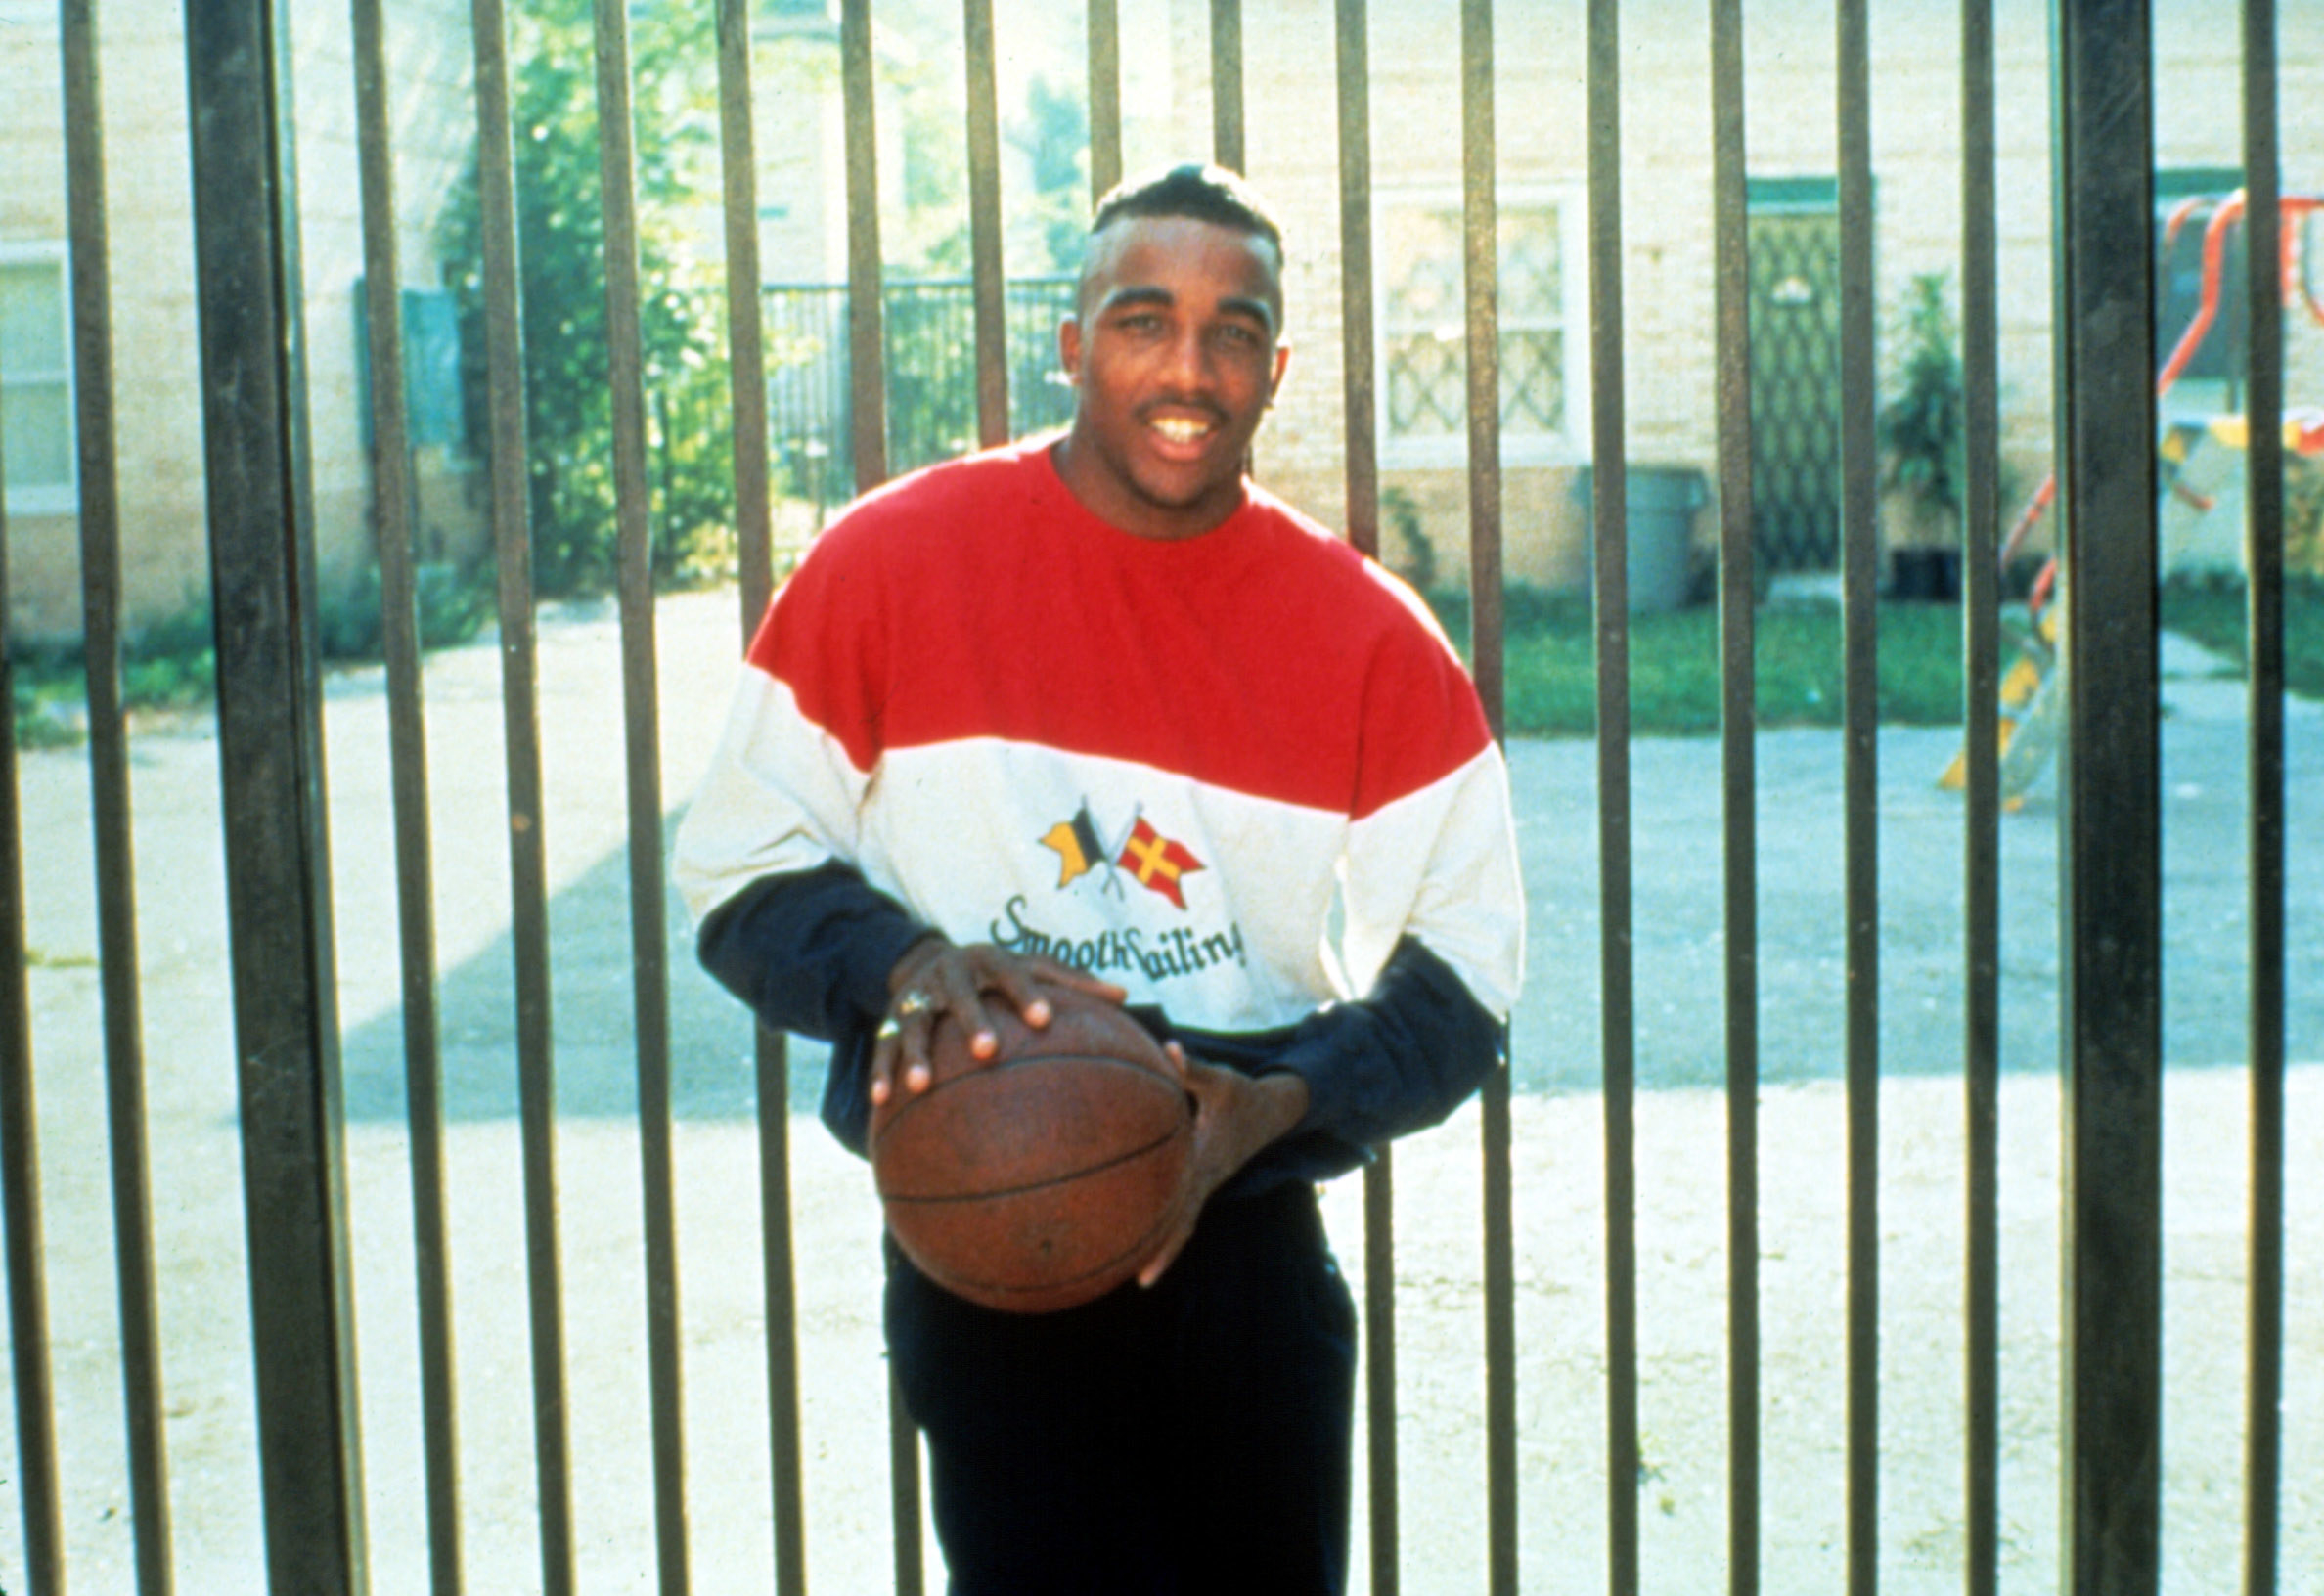 A young man leaning against a gate and holding a basketball